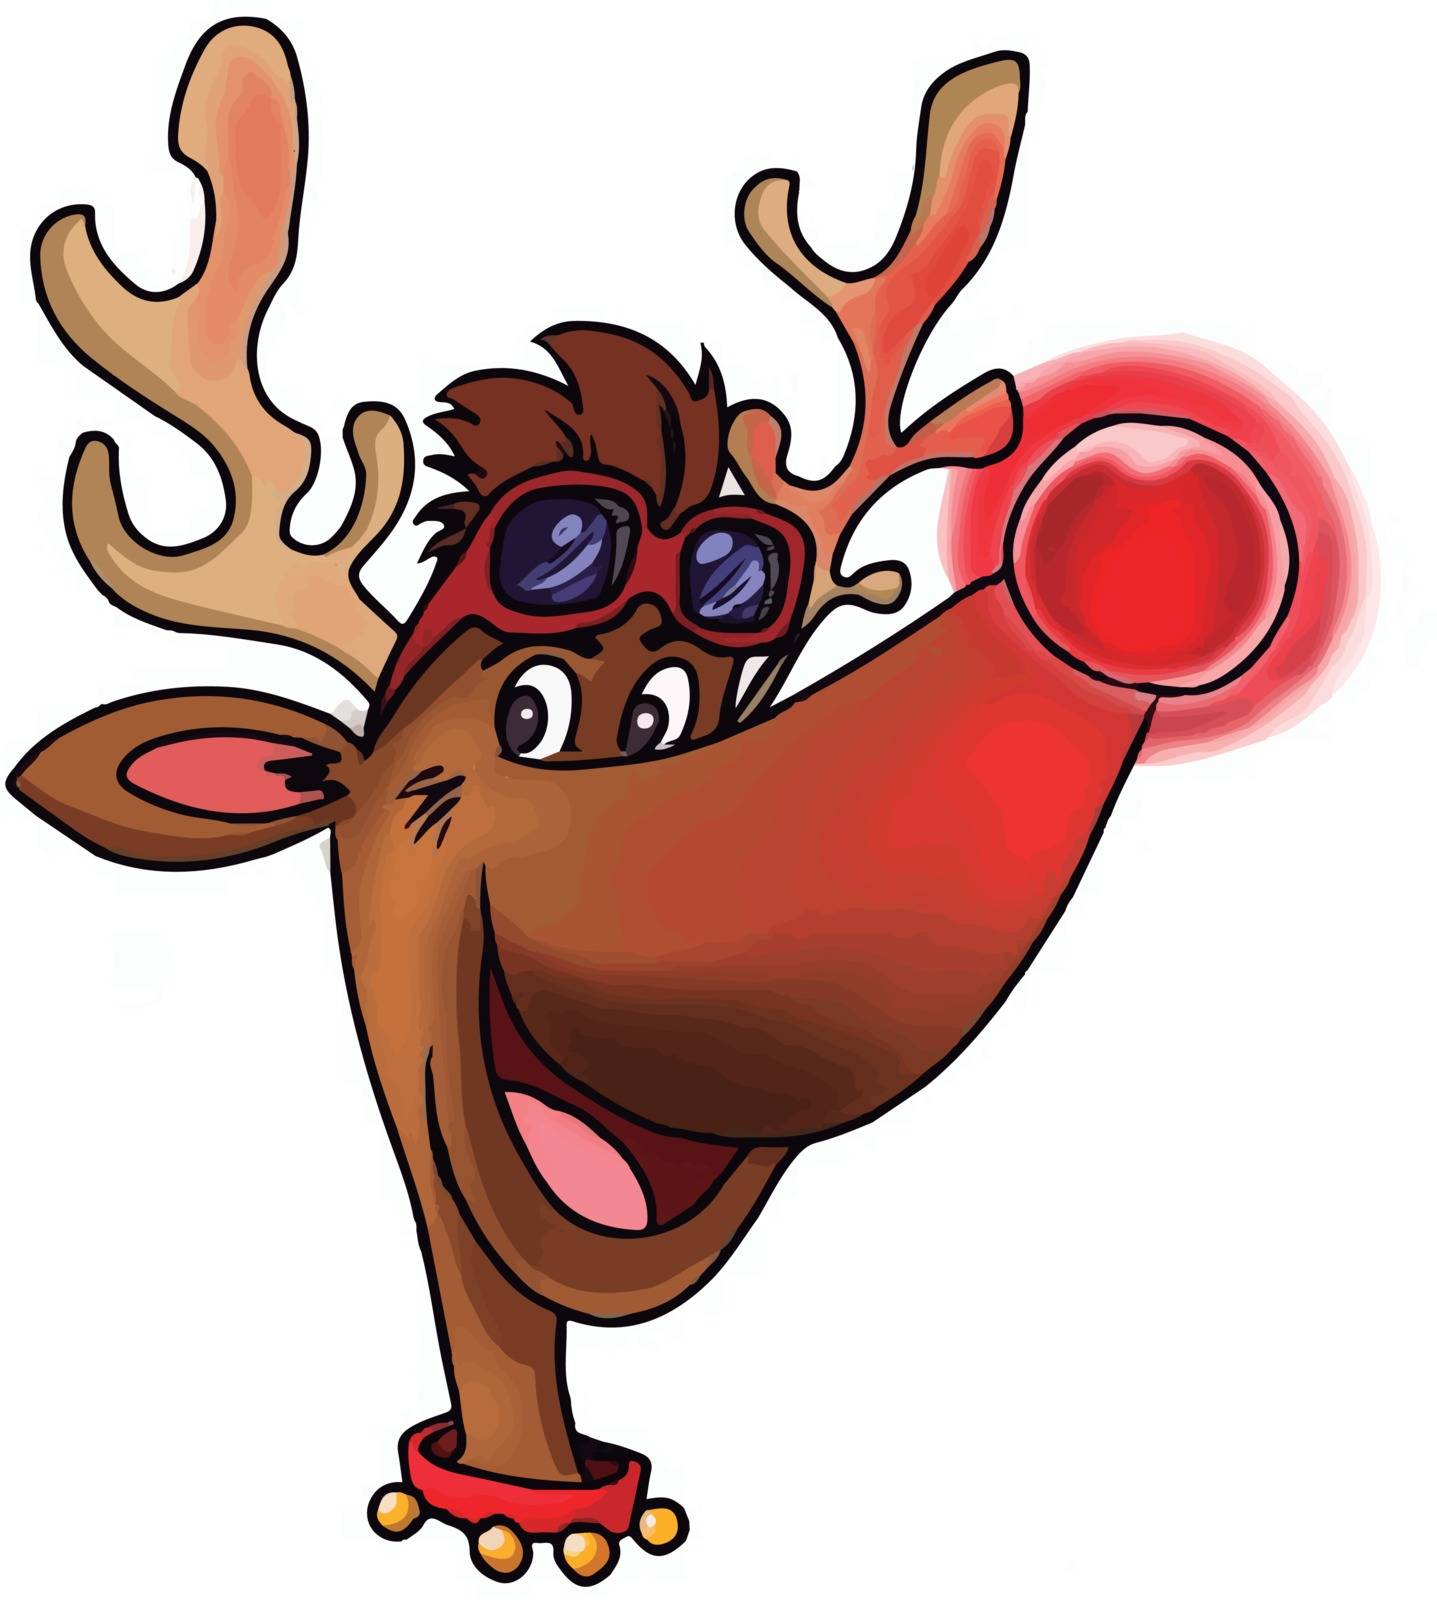 A reindeer with big red nose, illustration, vector on white back by Morphart